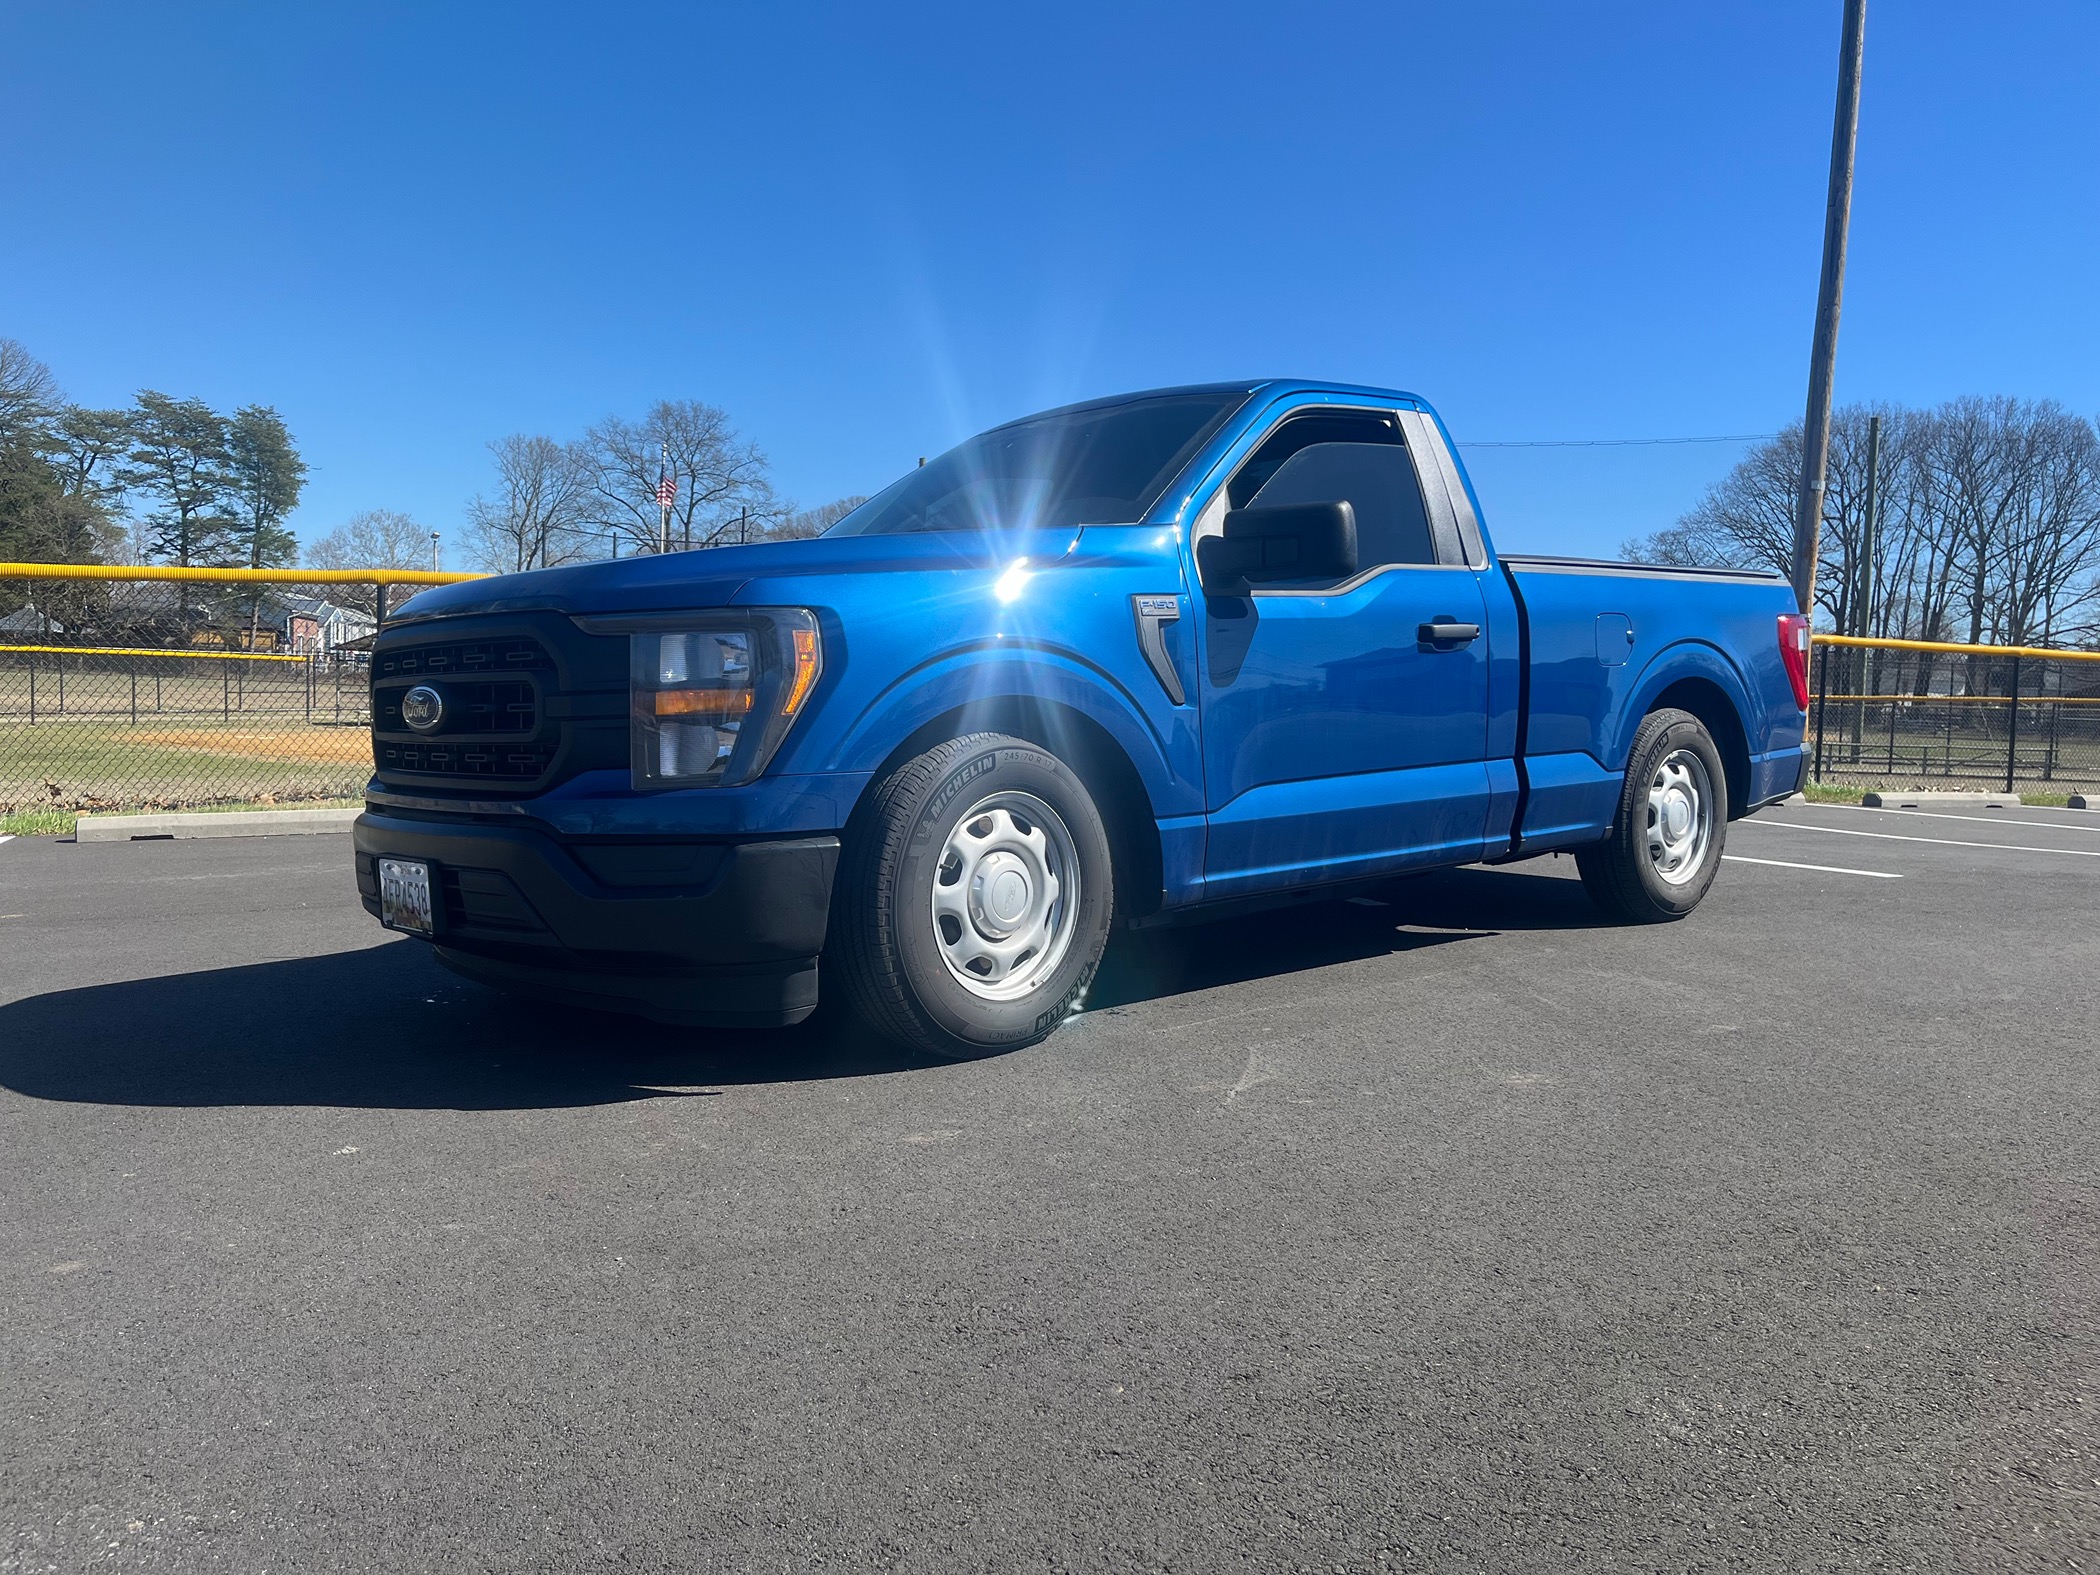 Ford F-150 Random F-150 Photos of the Day - Post Yours! 📸 🤳 IMG_7419